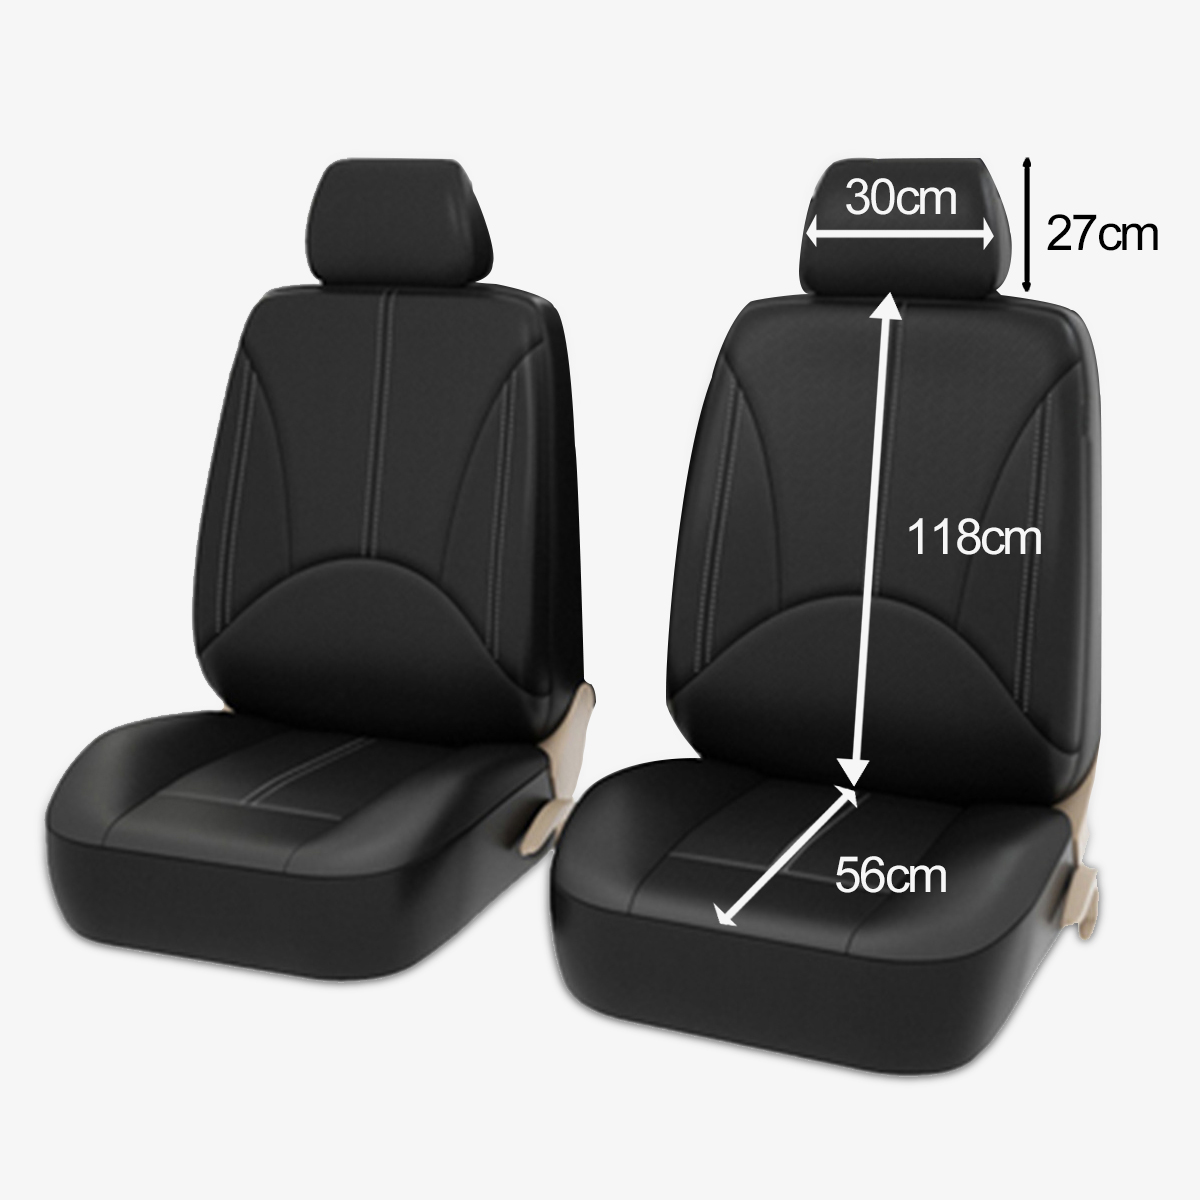 4PCS Front Seat Universal Car Seat Covers Faux Leather Breathable Cushion